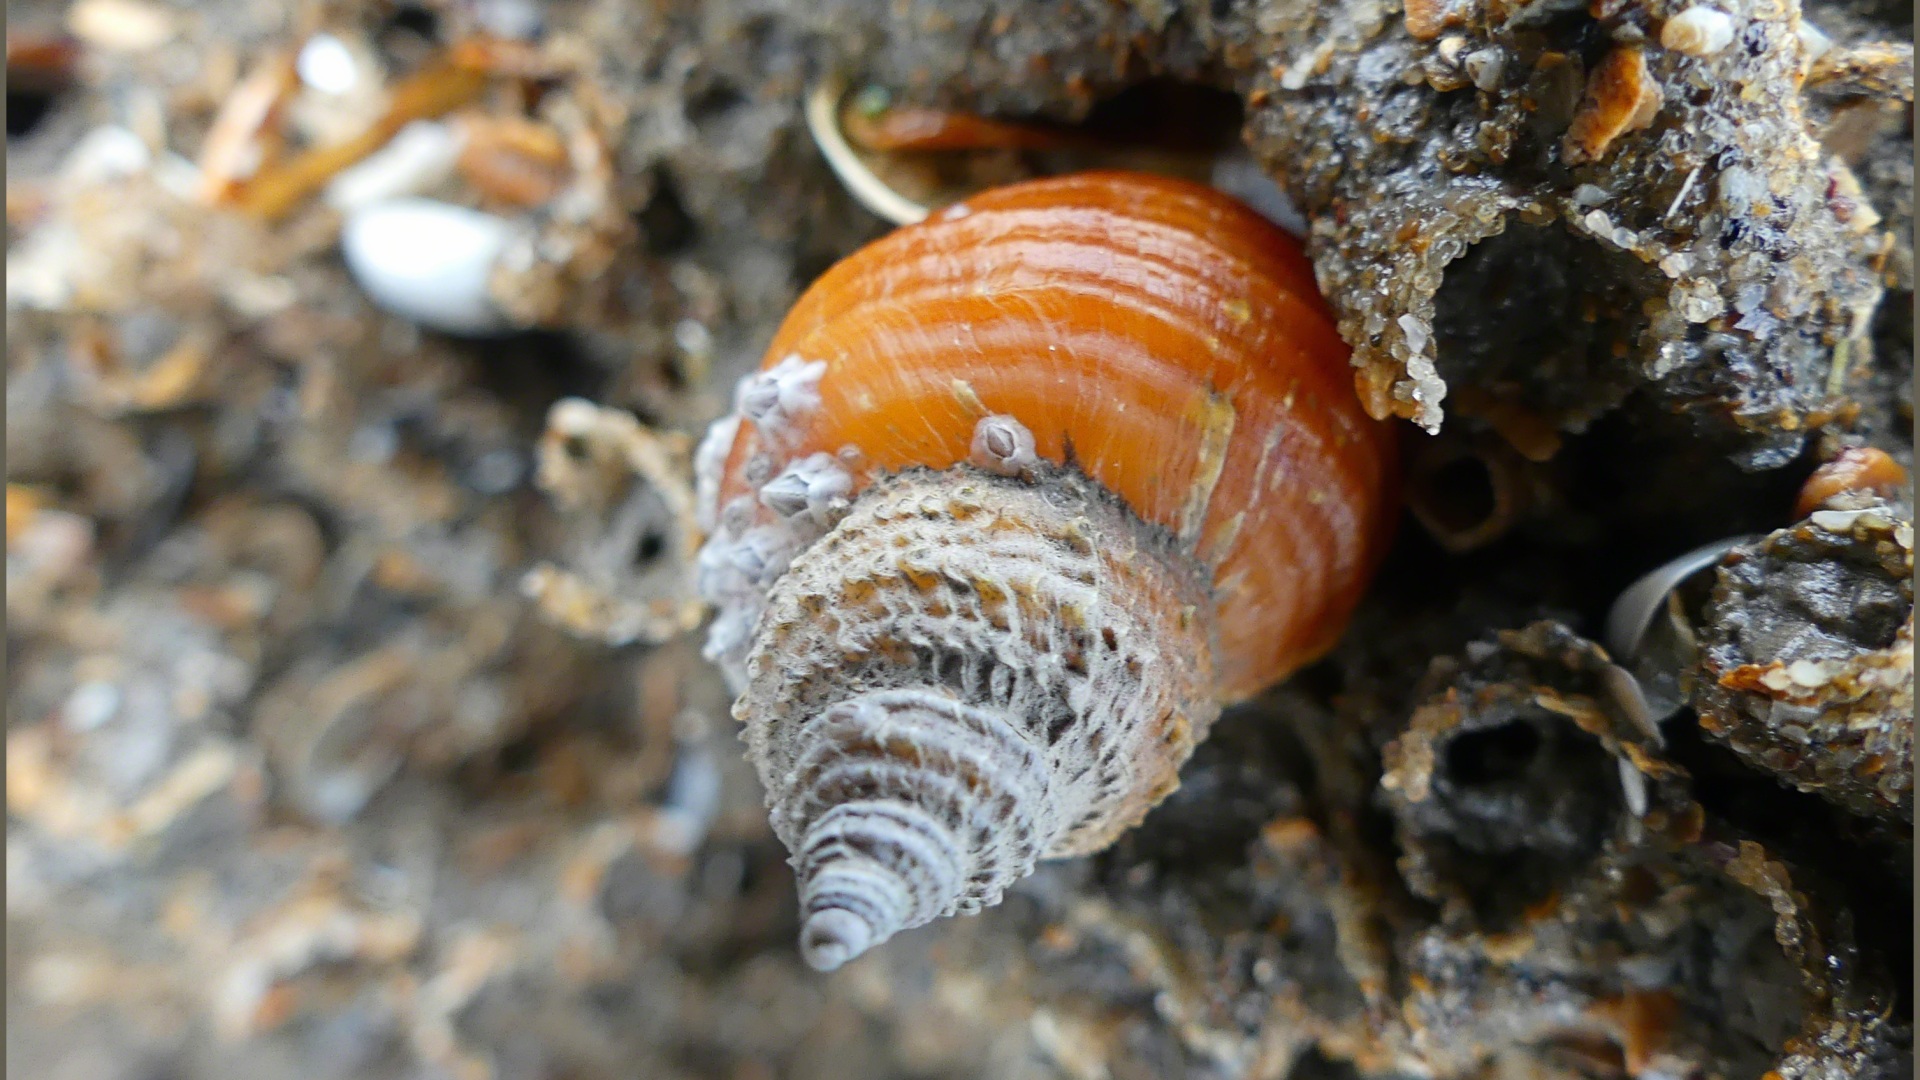 Dog whelk on honeycomb worm reef showing unusual shell features